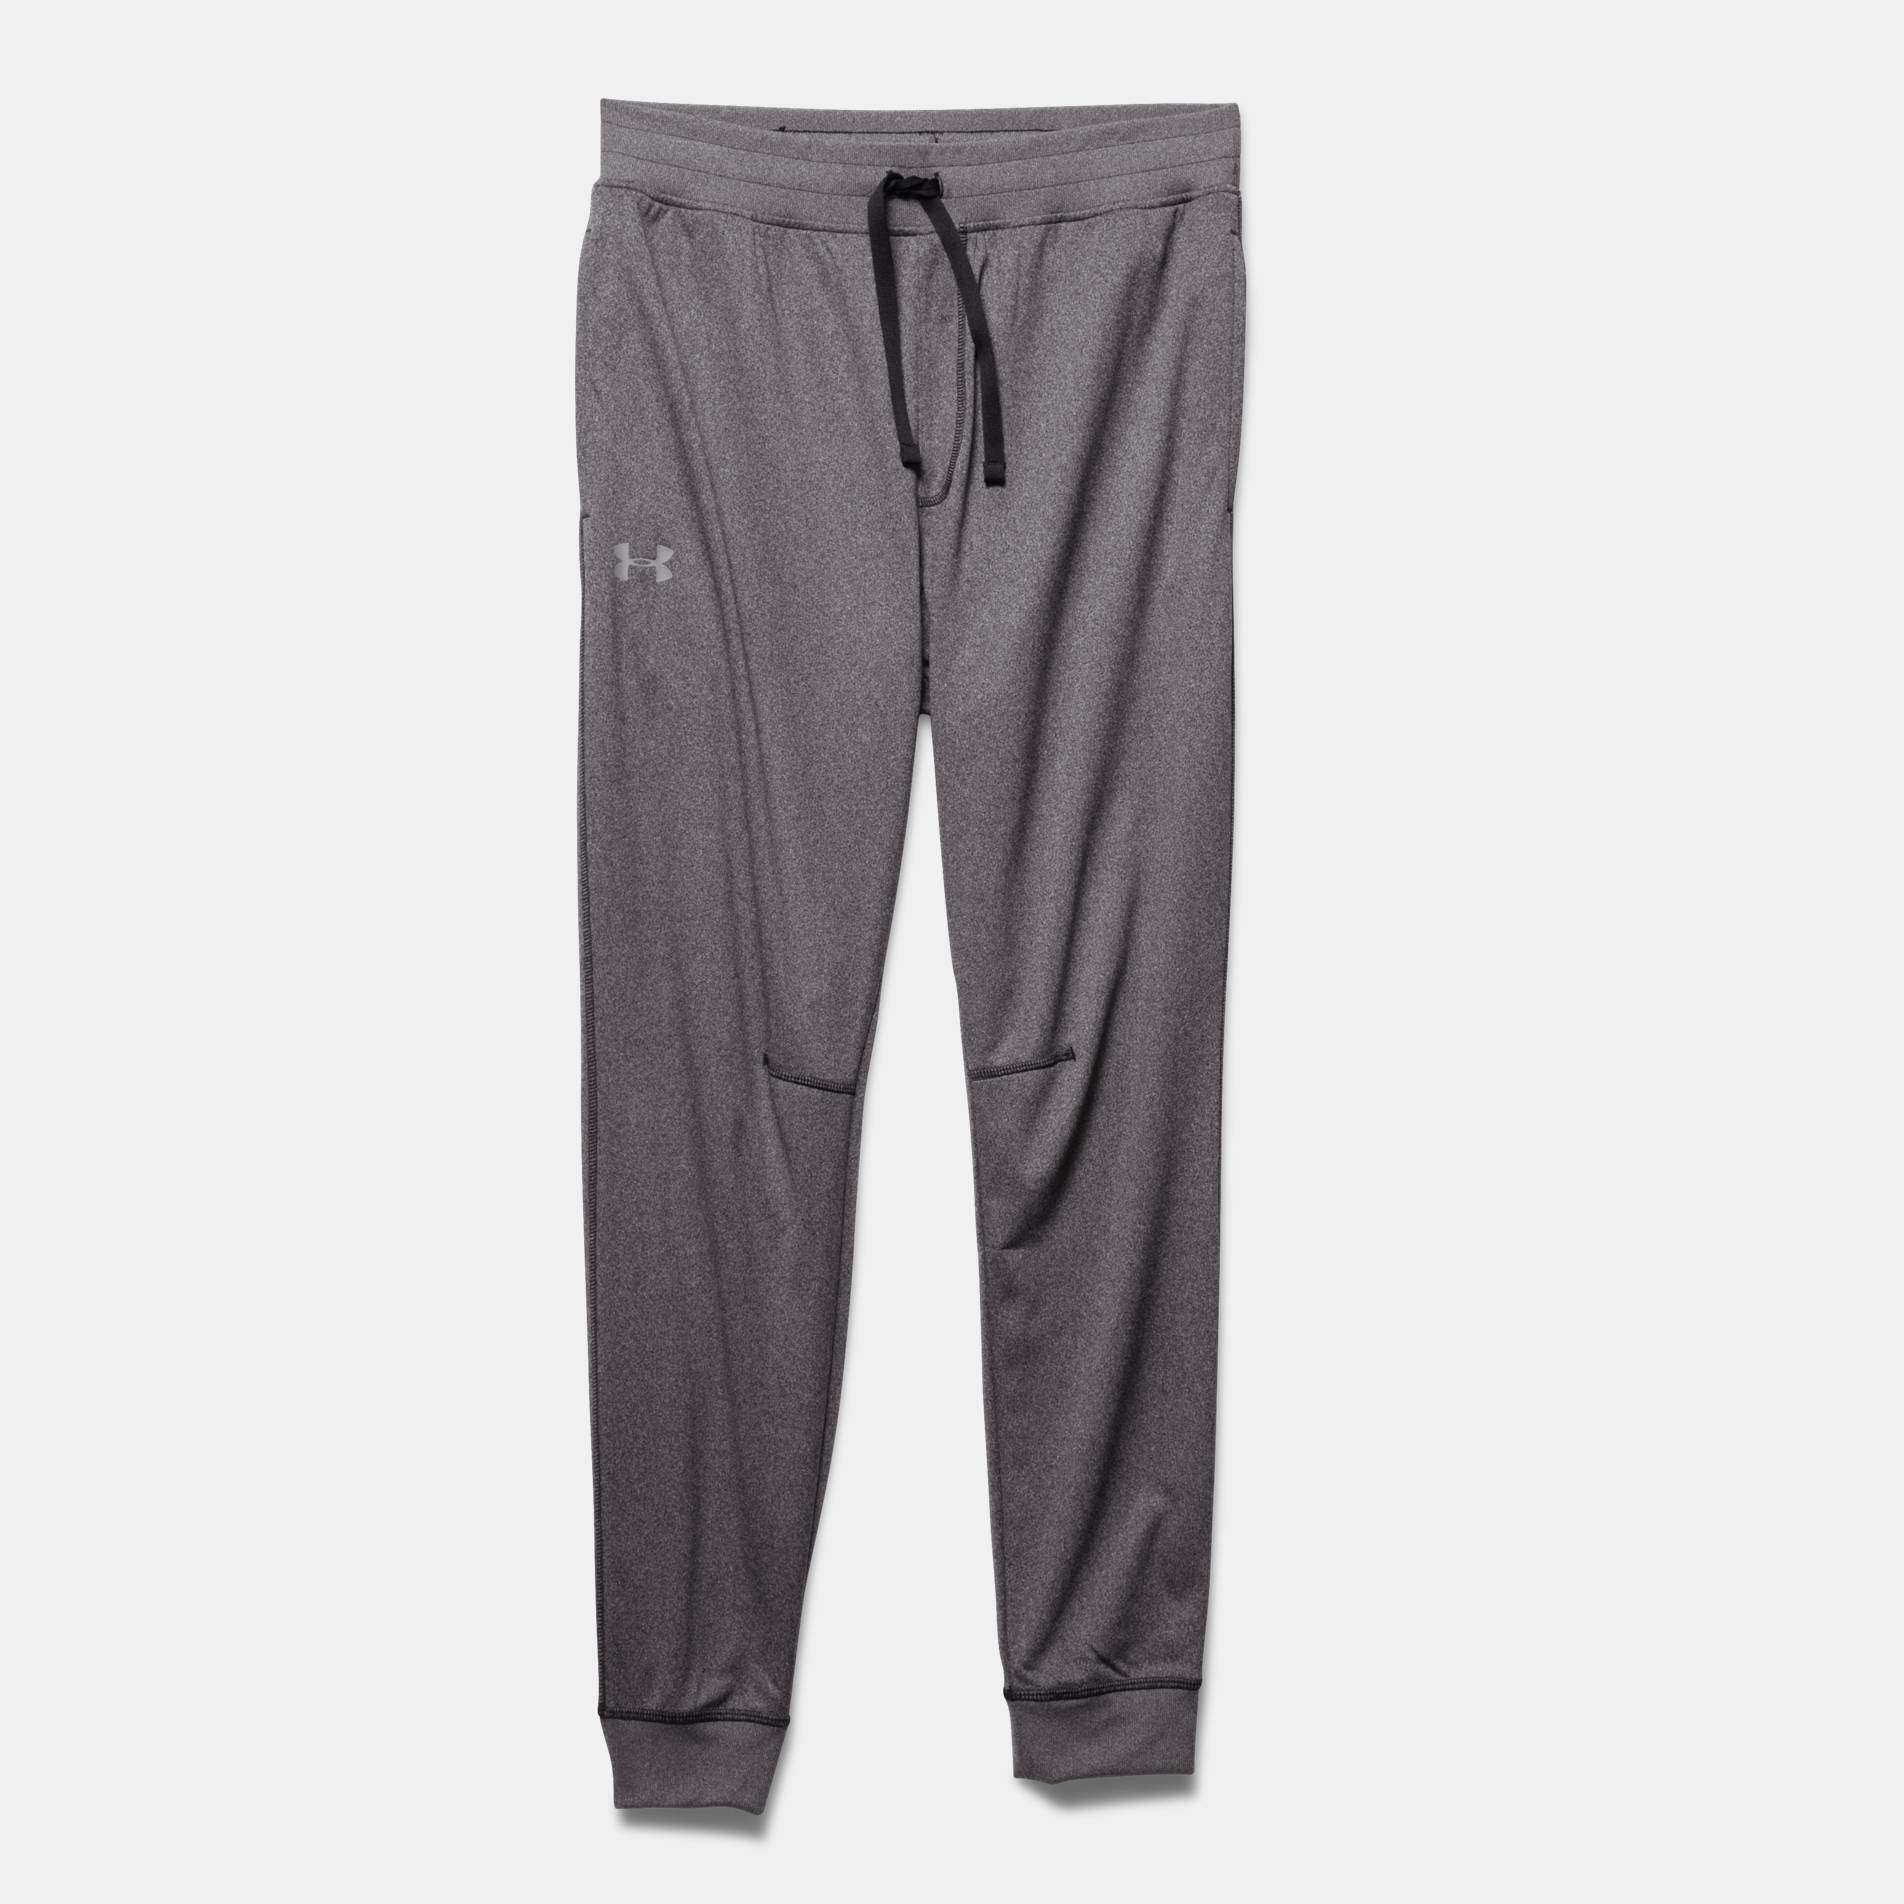  -  under armour Sportstyle Jogger